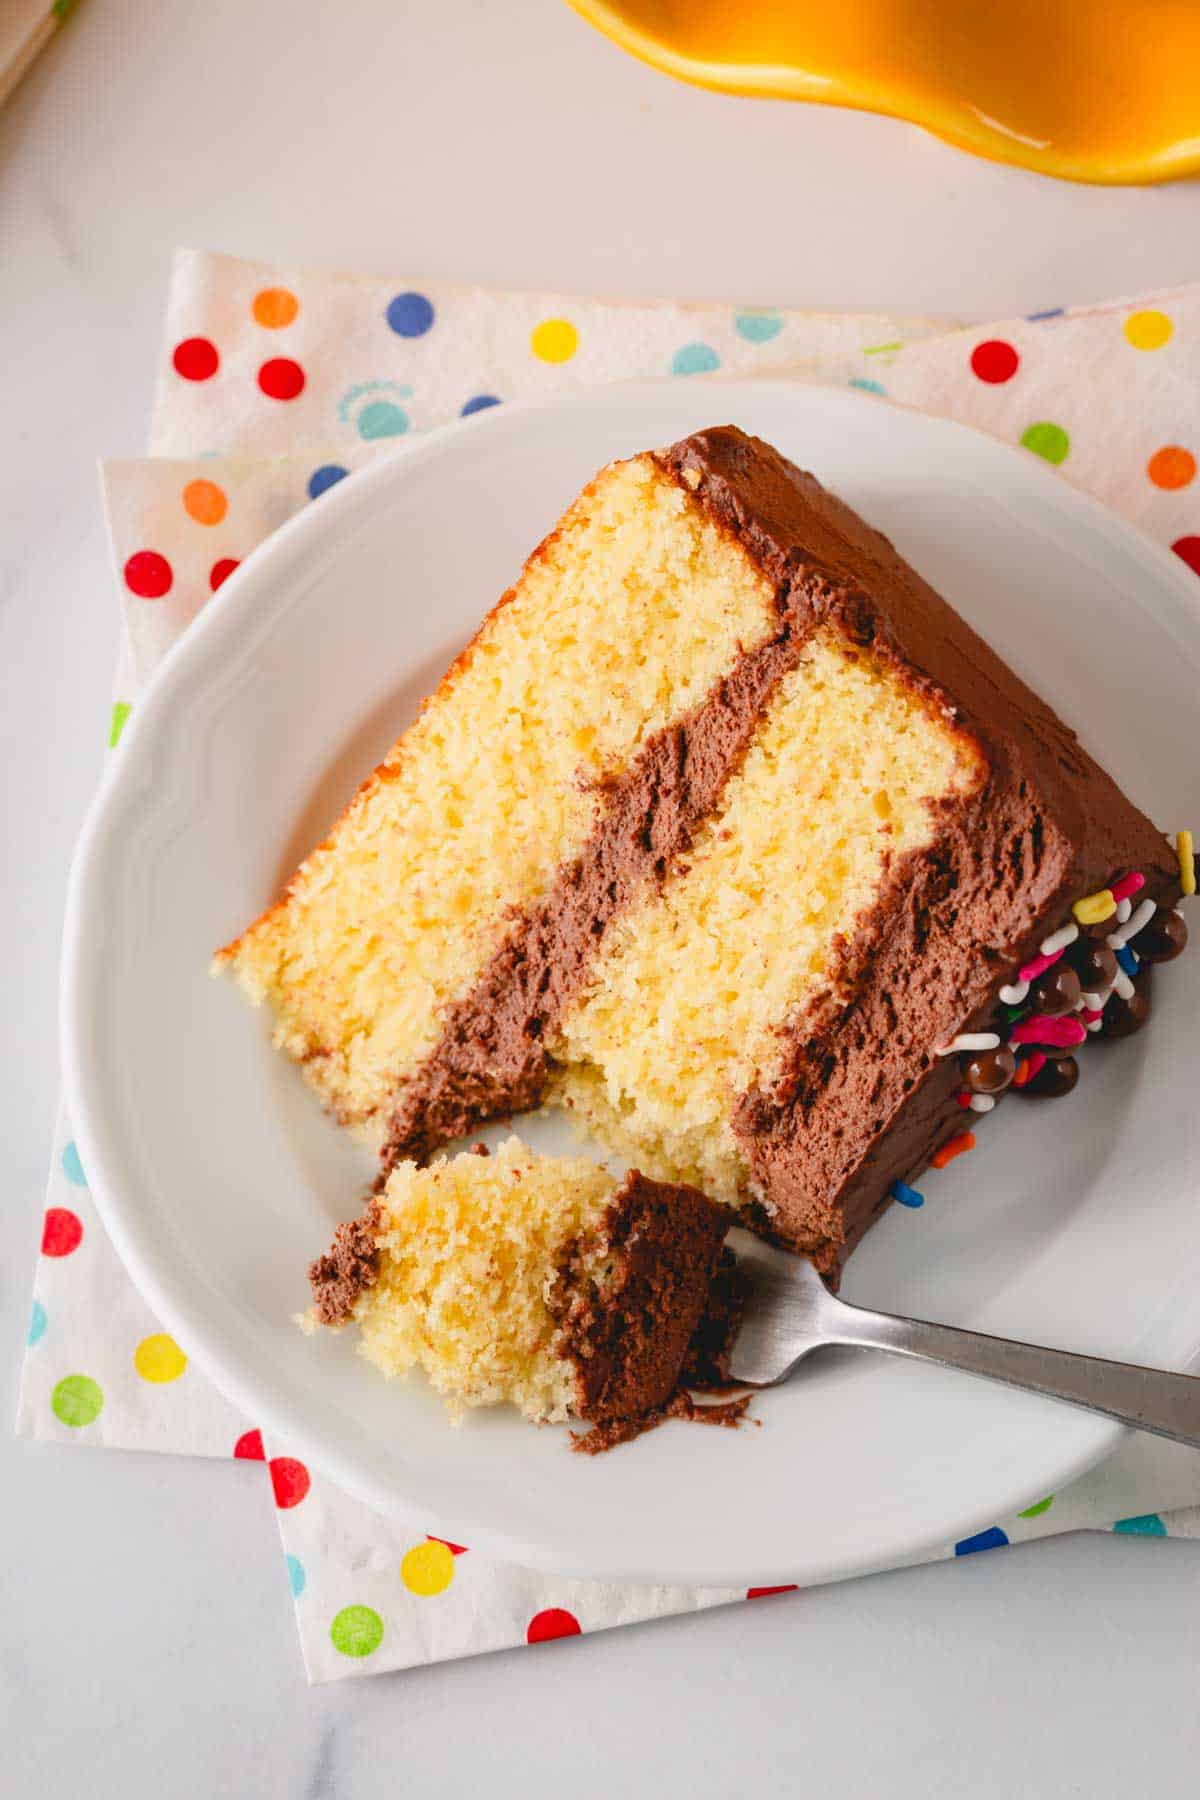 A slice of a two layer yellow cake with chocolate frosting on a plate with a fork holding a bite.